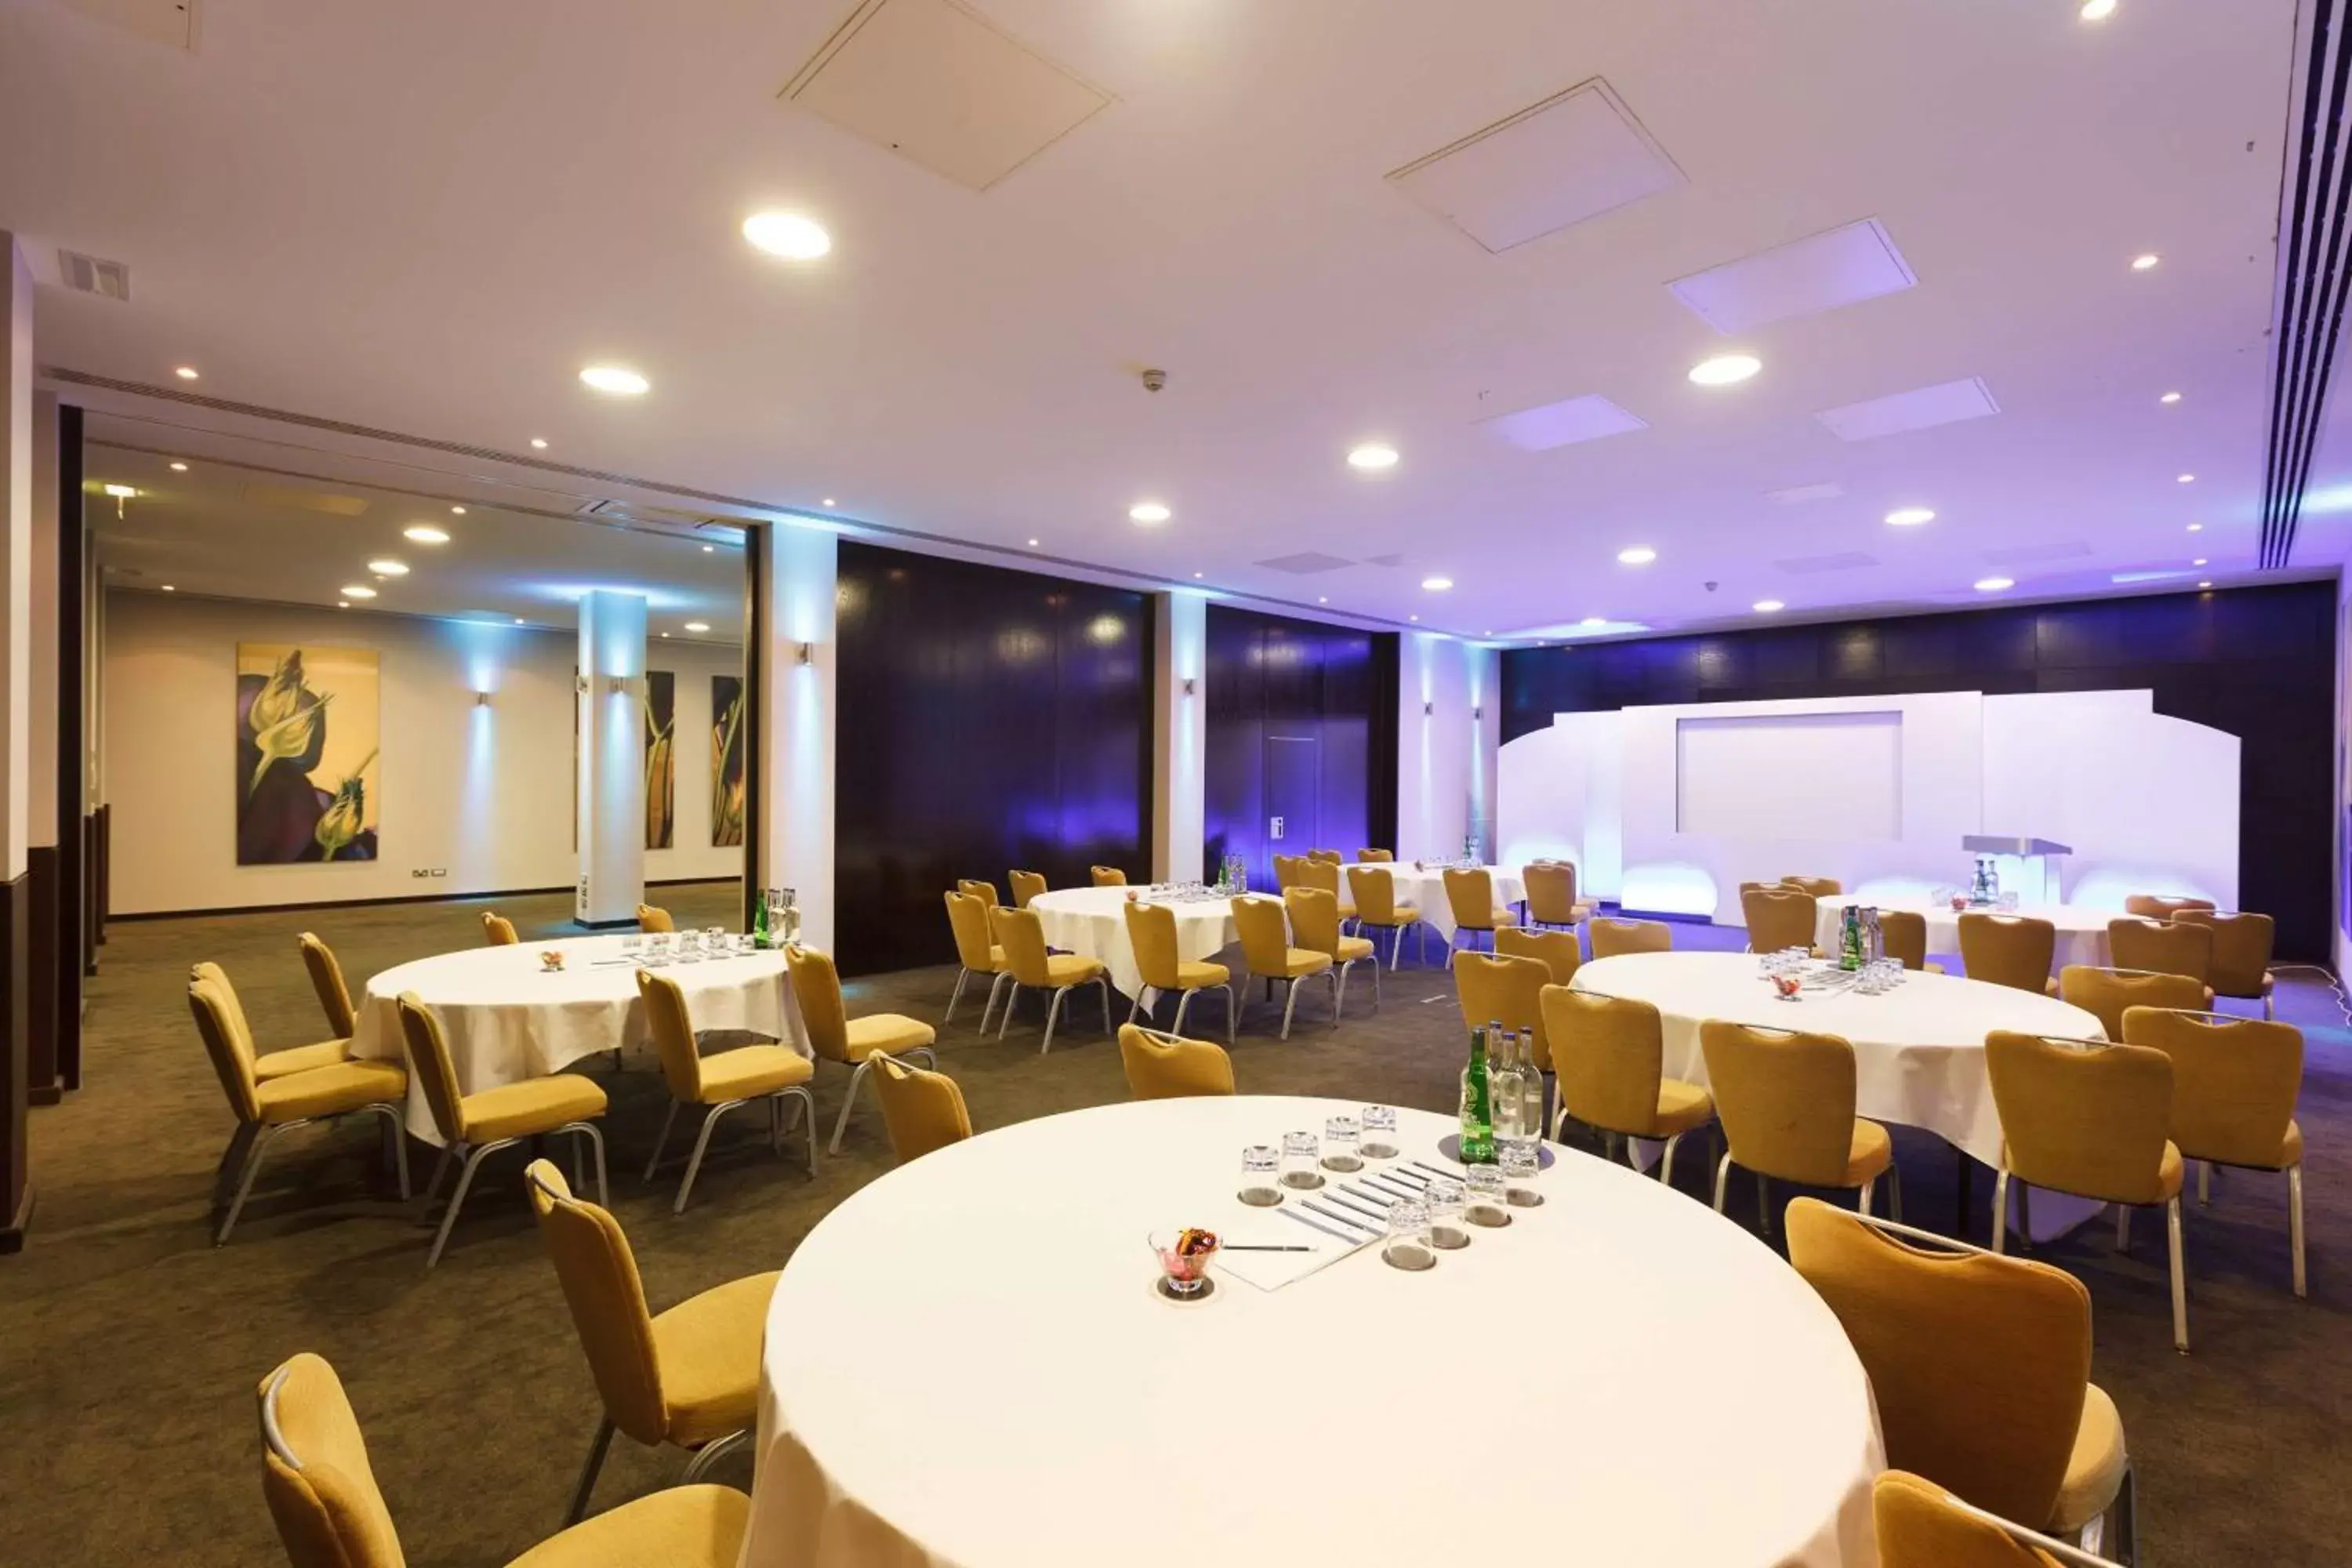 Meeting/conference room, Banquet Facilities in Park Plaza Cardiff